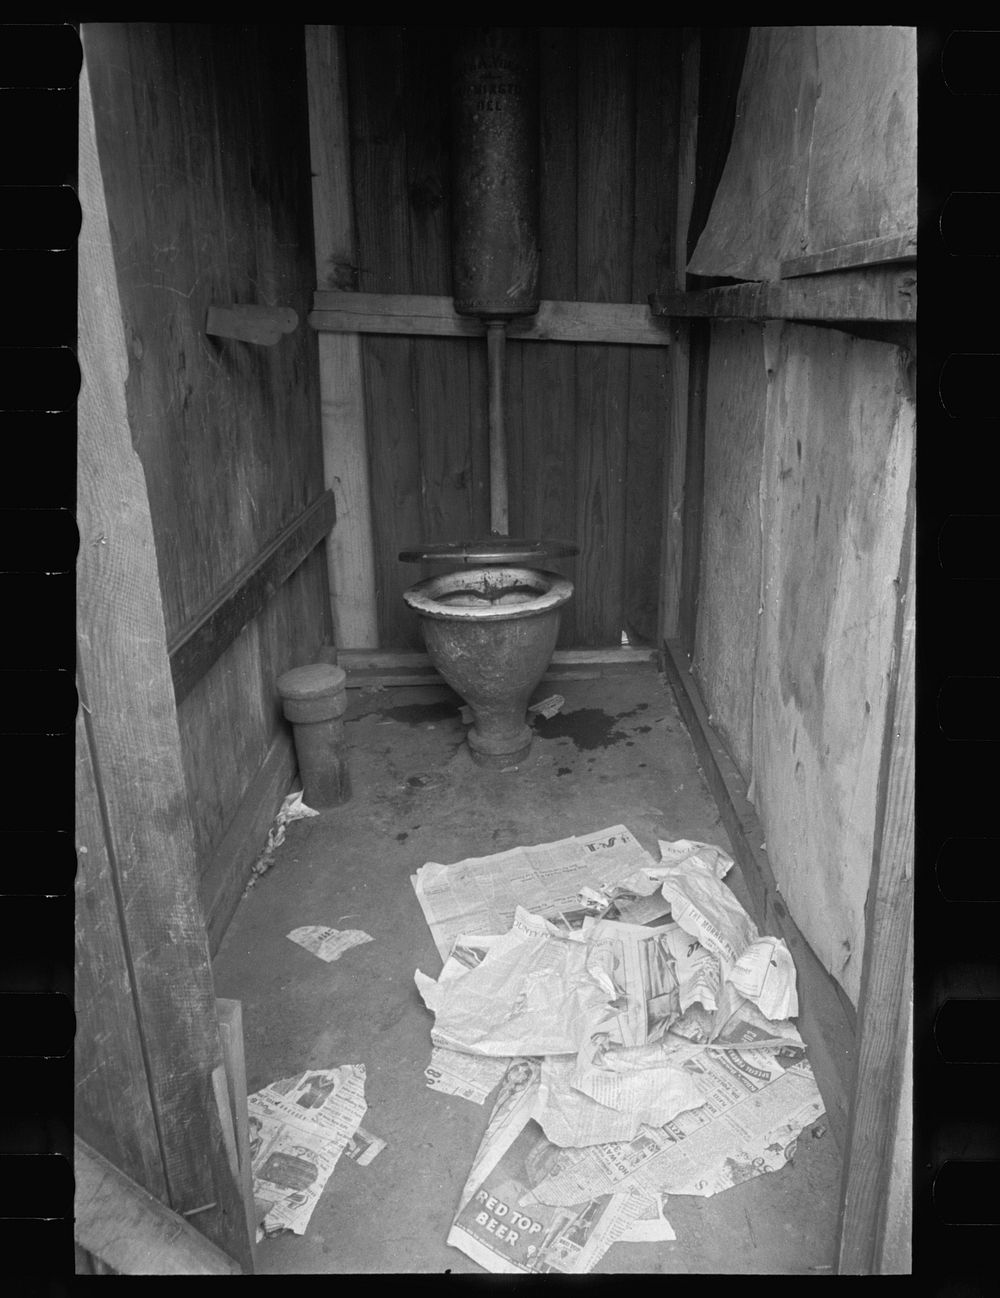 [Untitled photo, possibly related to: Typical outside toilet, Cincinnati, Ohio]. Sourced from the Library of Congress.